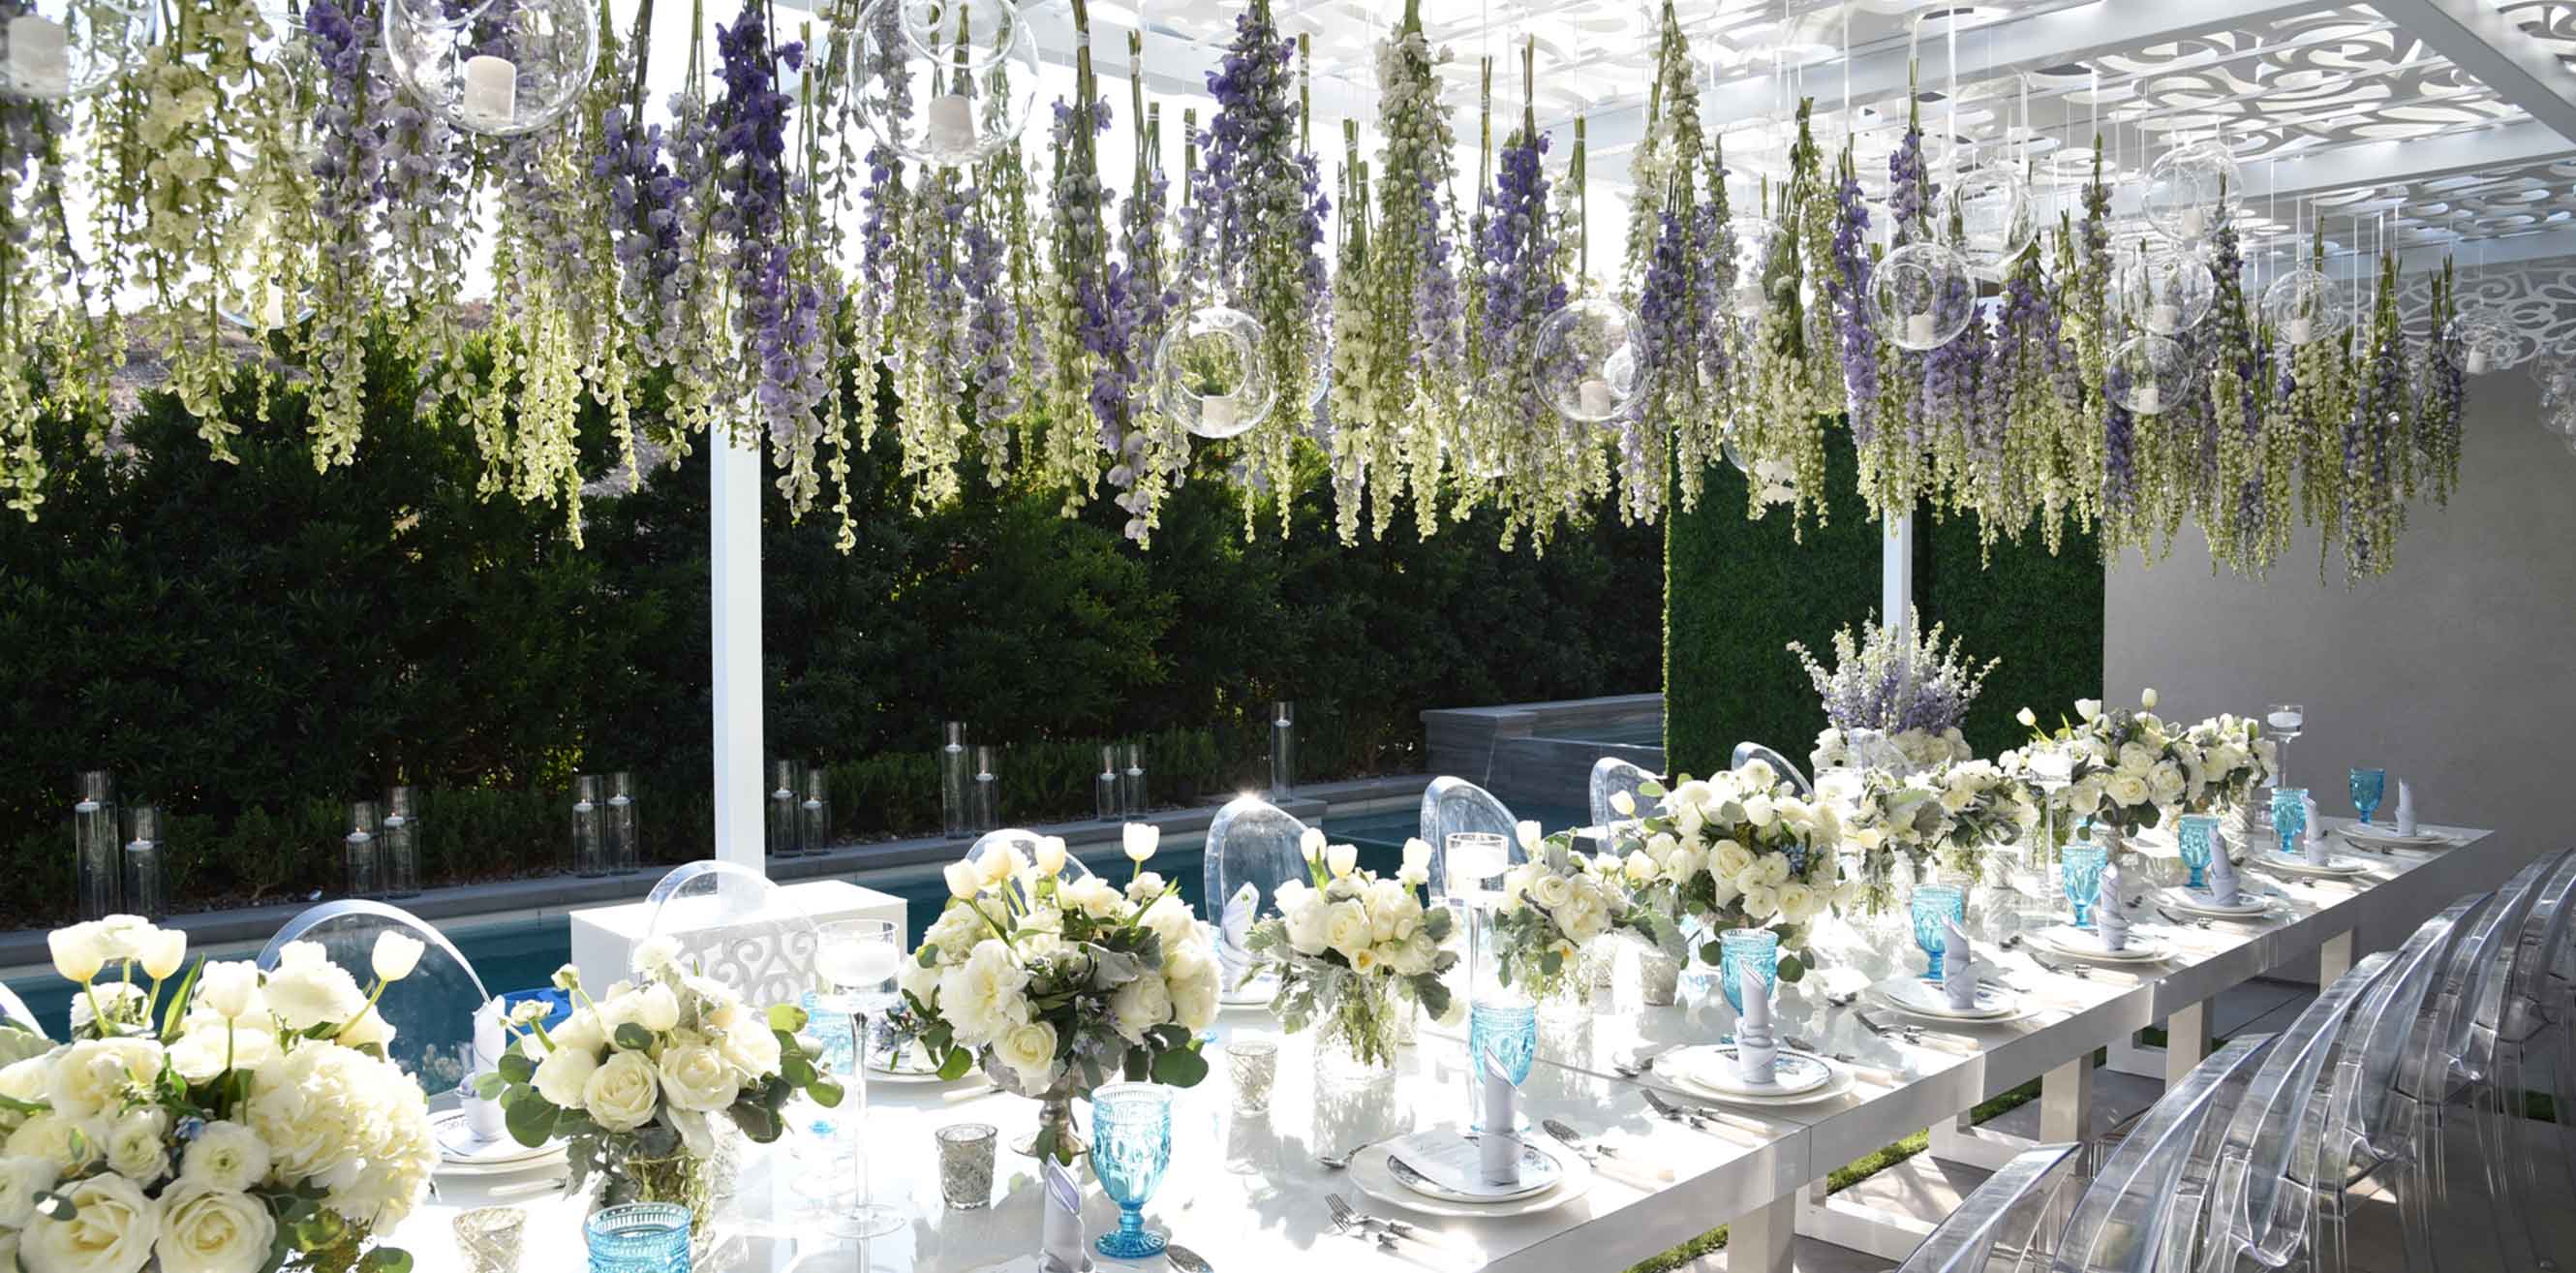 Flowers suspended over the table at an outdoor baby shower